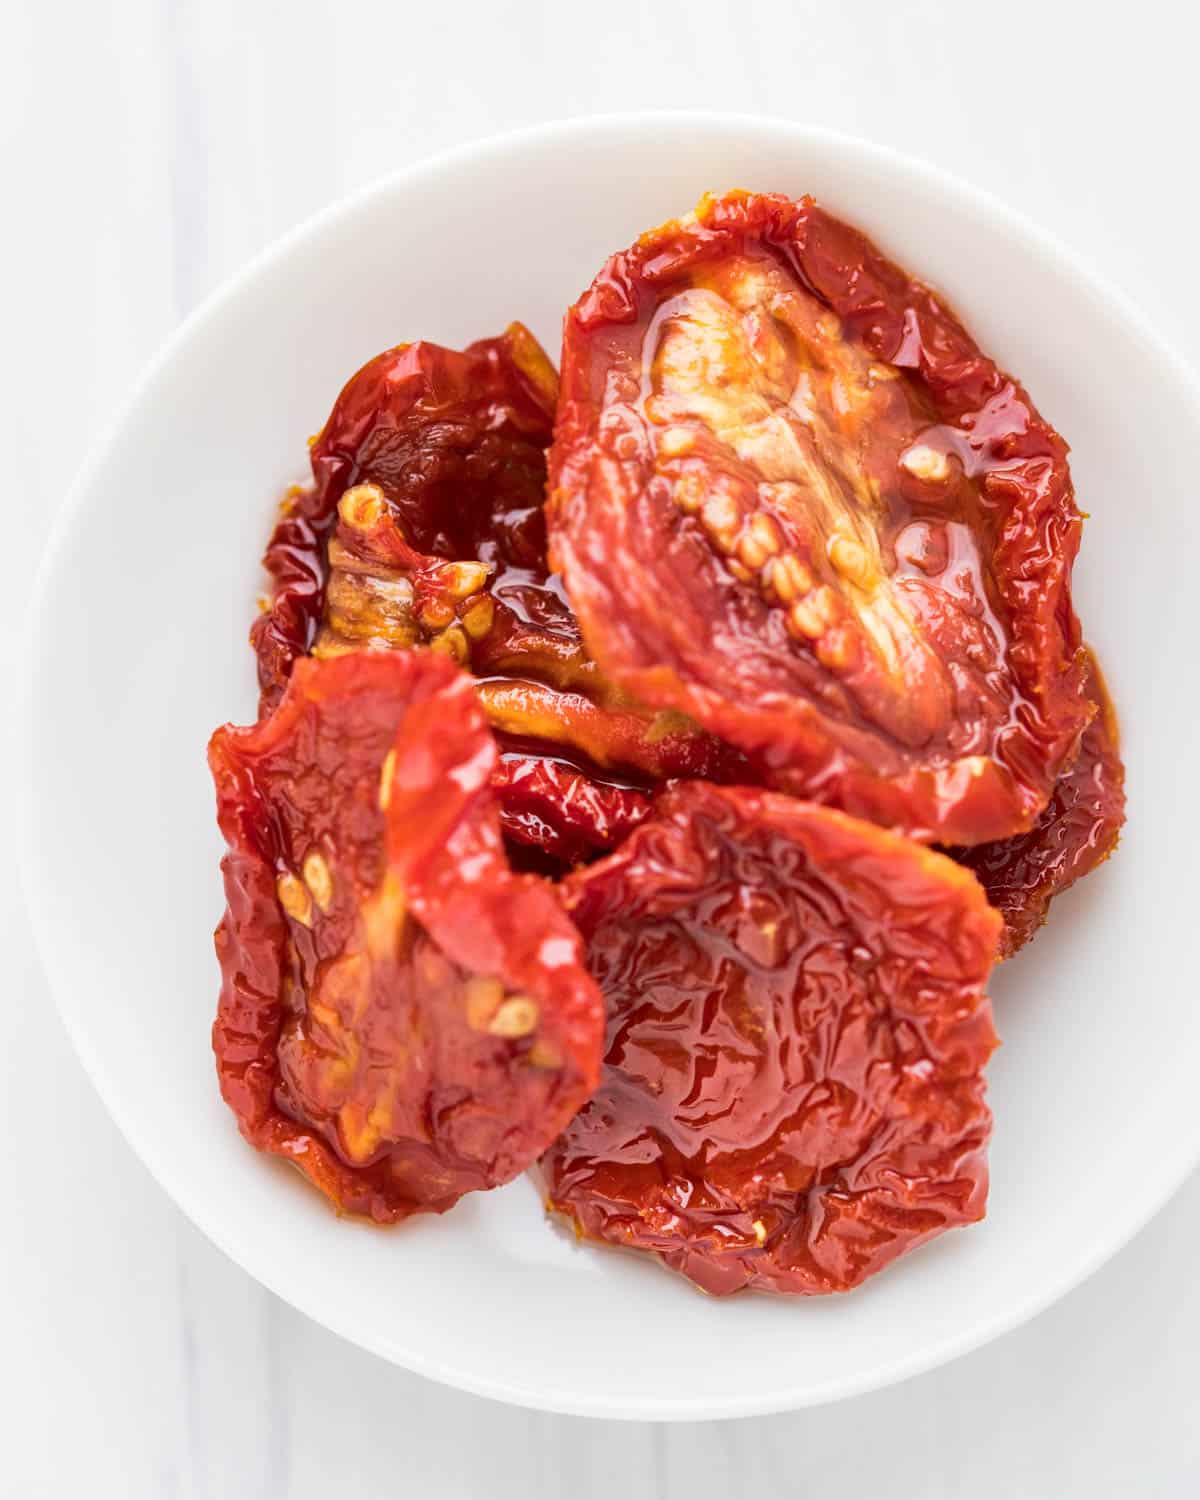 sun-dried tomatoes on a white dish.